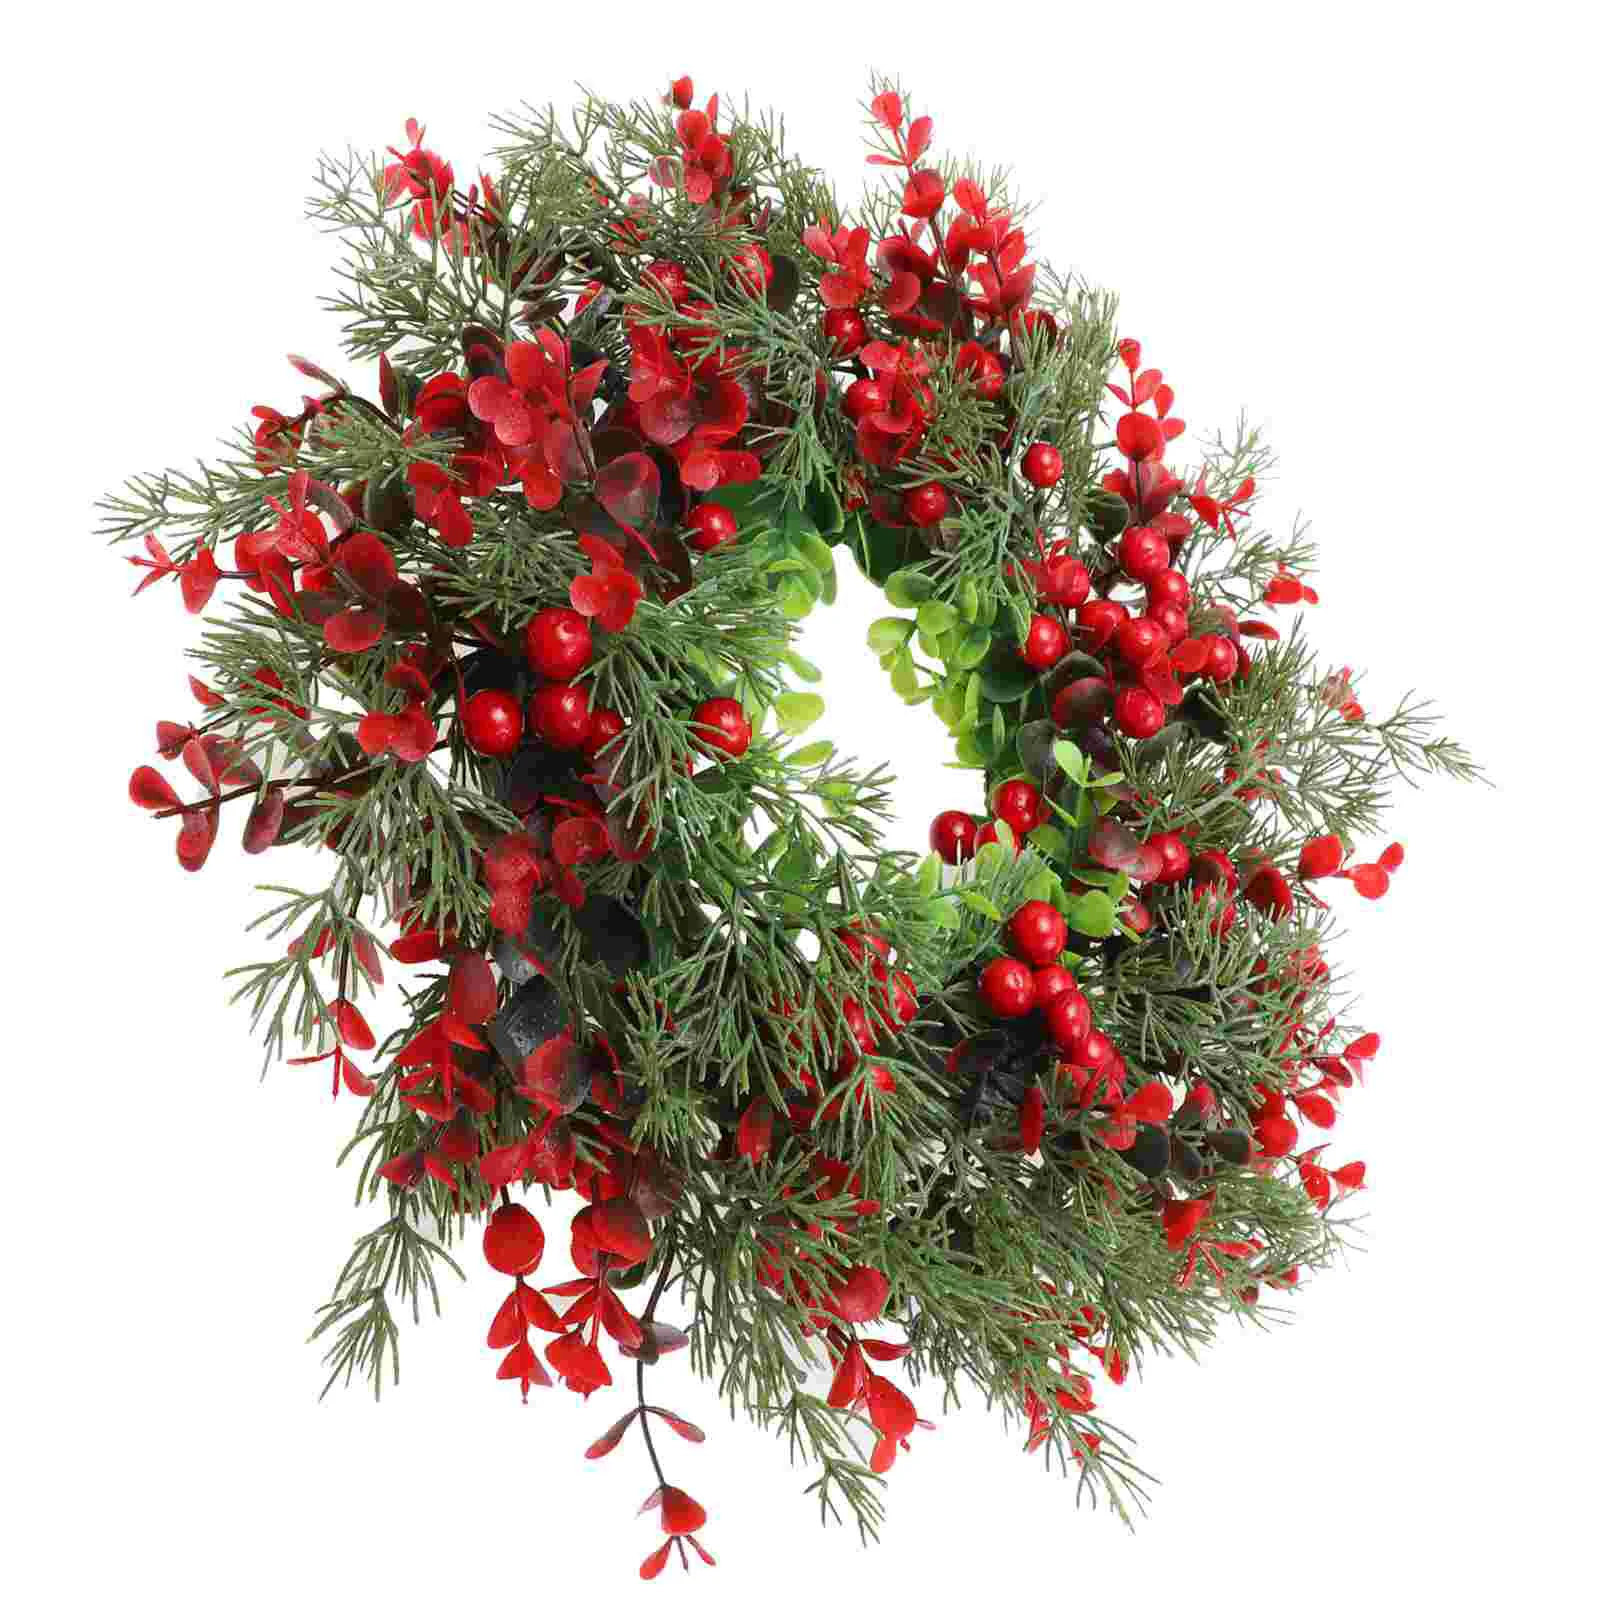 

Wreath Christmas Door Berry Wreathsfront Artificialgarland Red Outdoor Winter Pine Holiday Decor Hanging Holly Windows Pendant